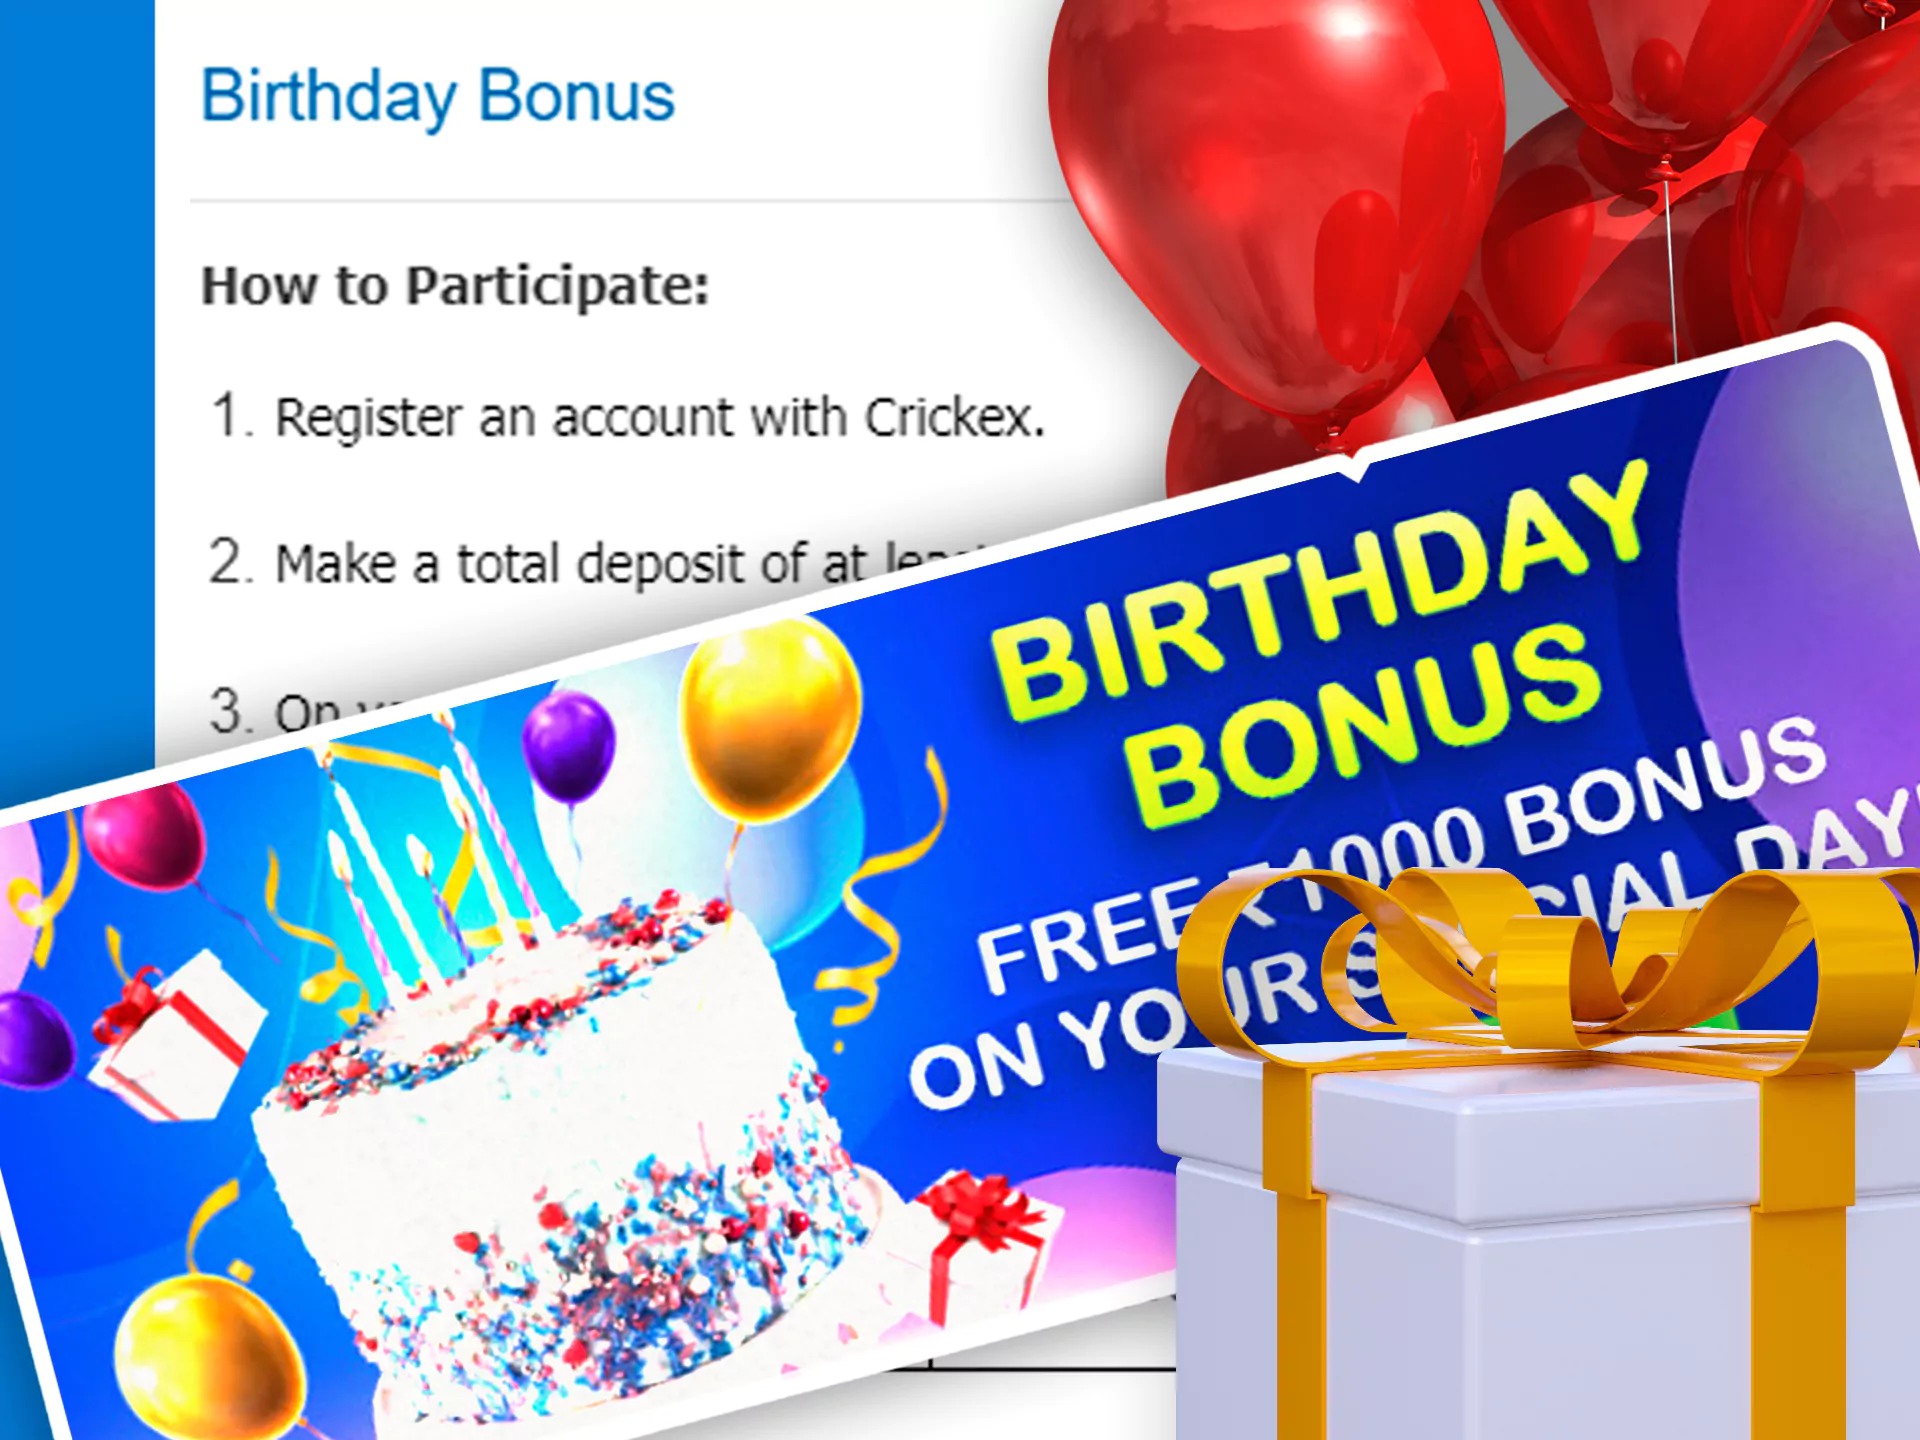 For profitable betting on kabaddi, don't forget to use the birthday bonus from Crickex.